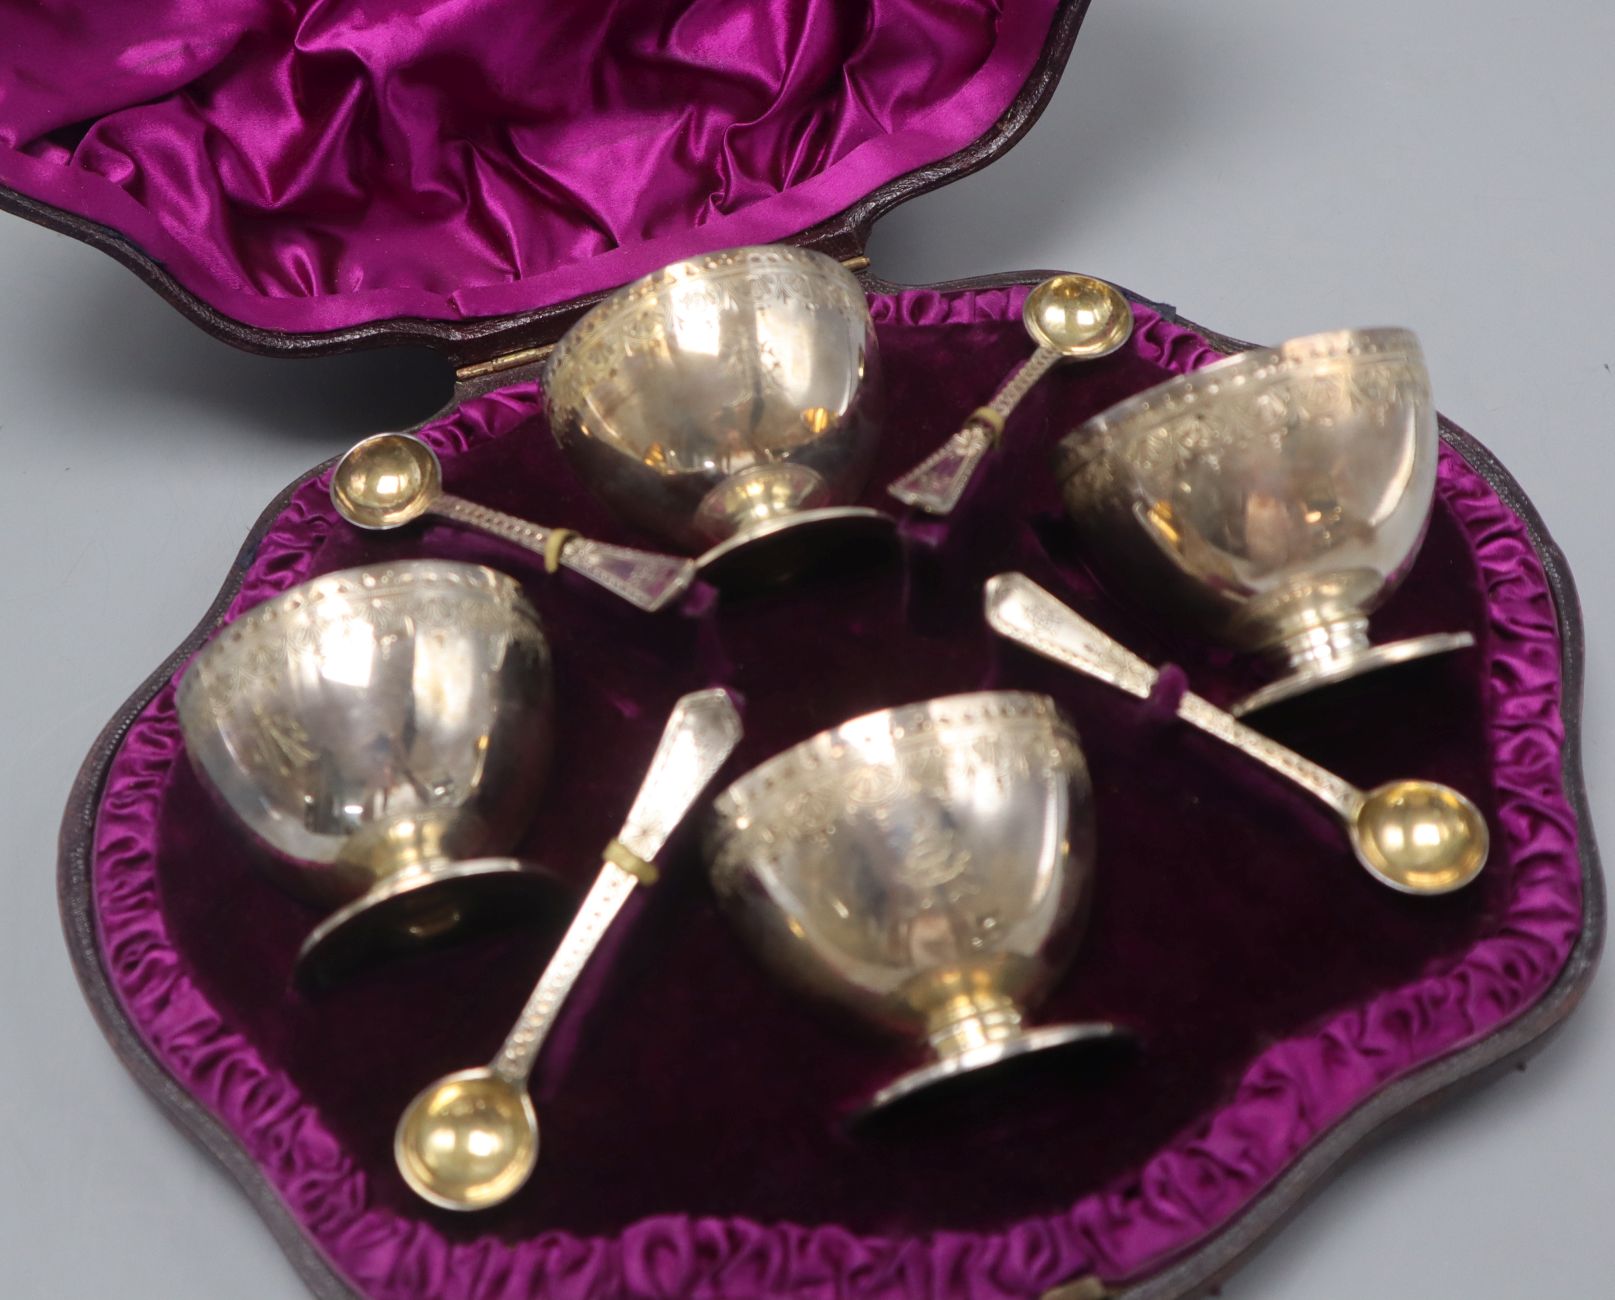 A cased set of 4 Victorian engraved silver salts and four spoons, London, 1882. - Image 2 of 2